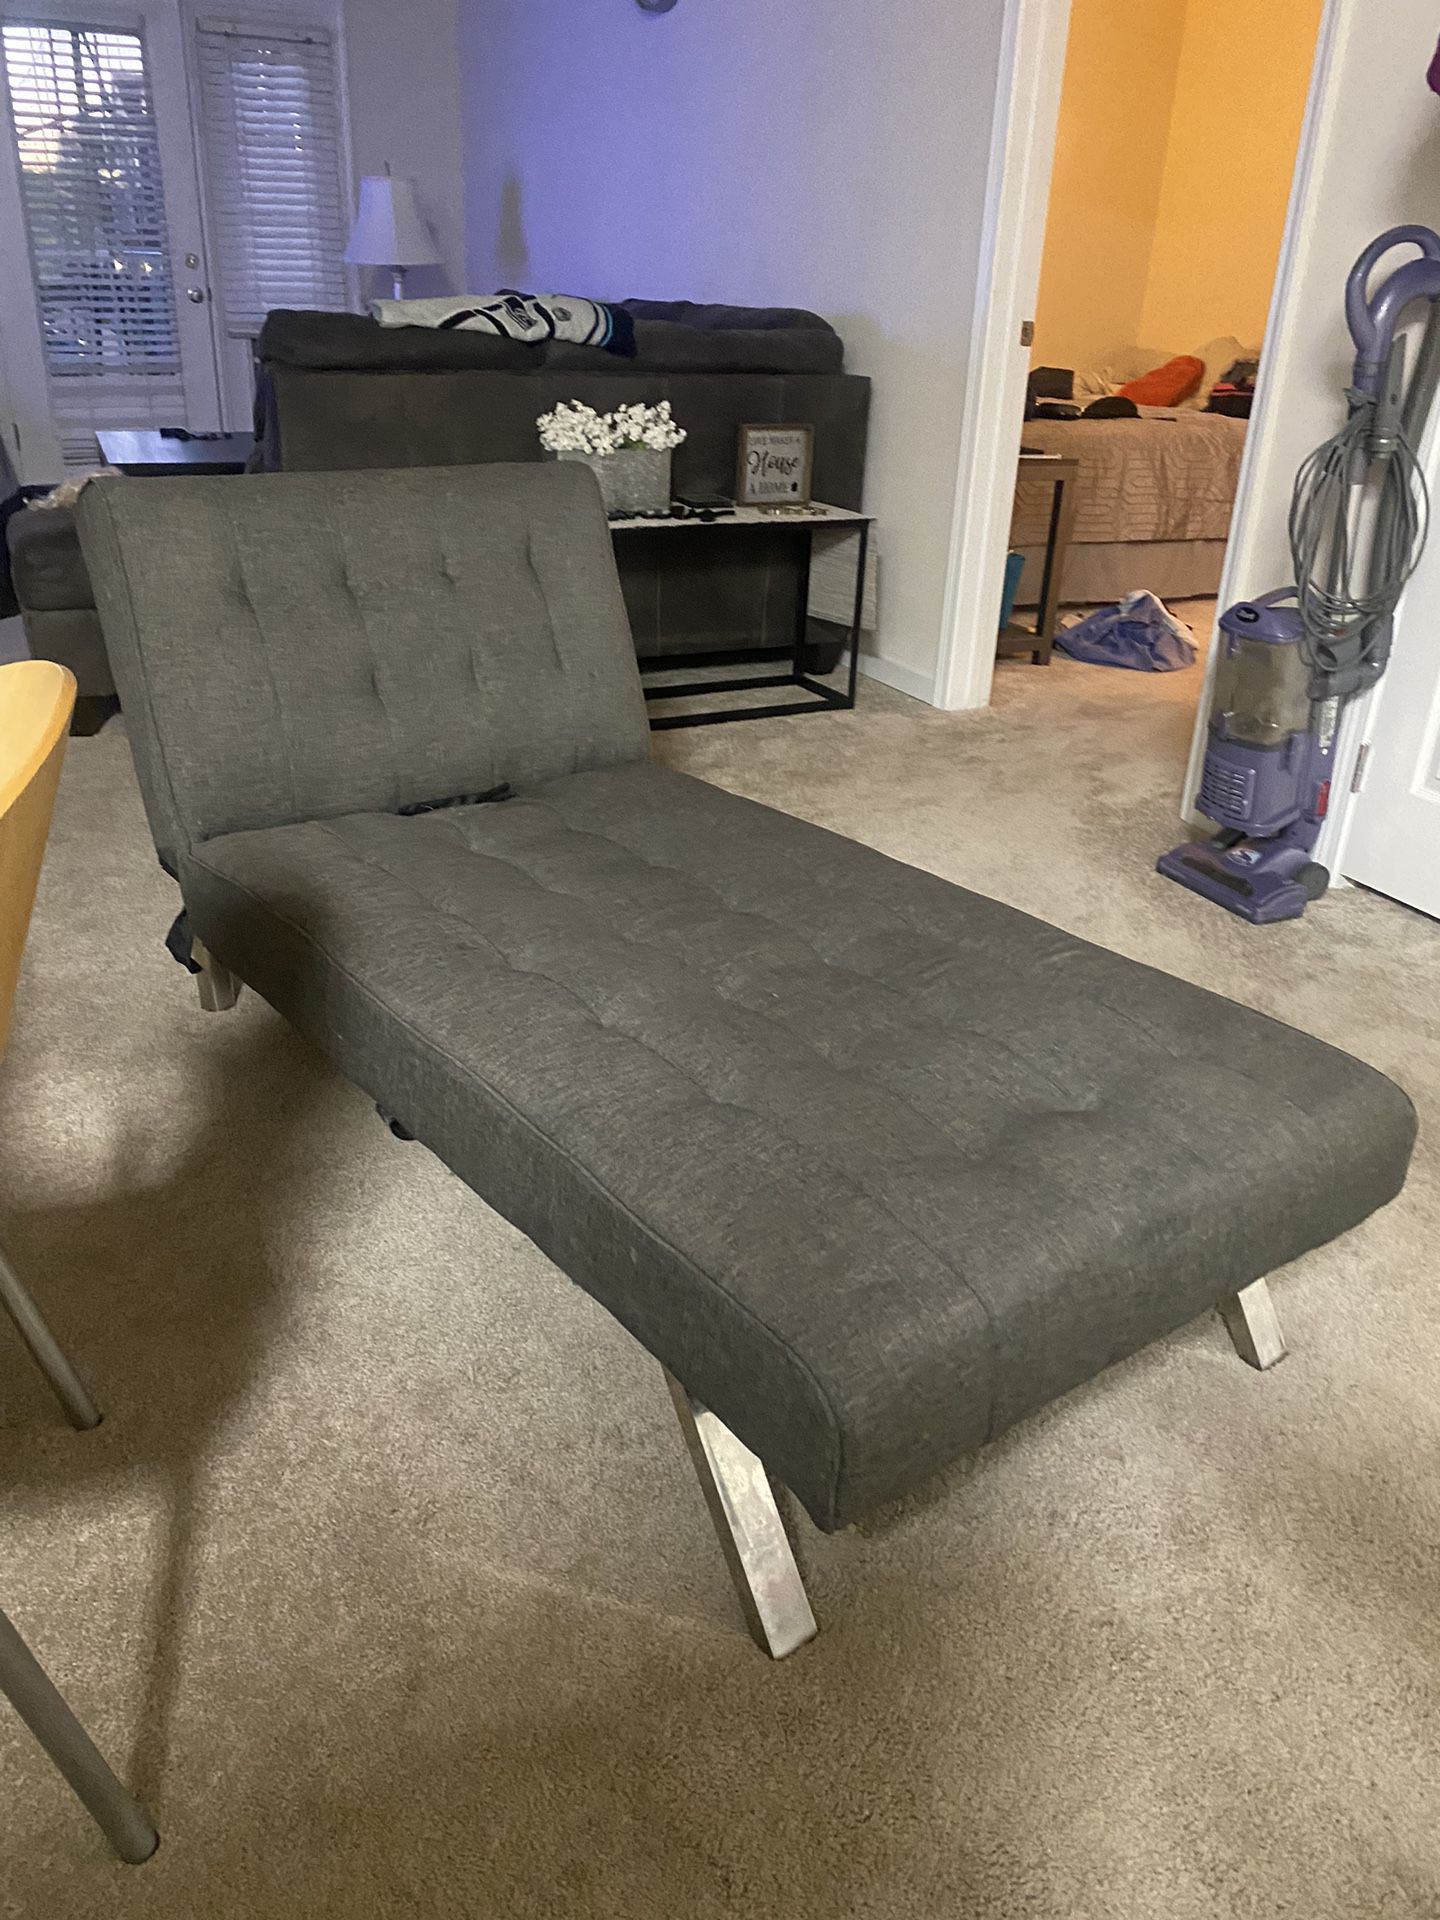 recliner chair/bed